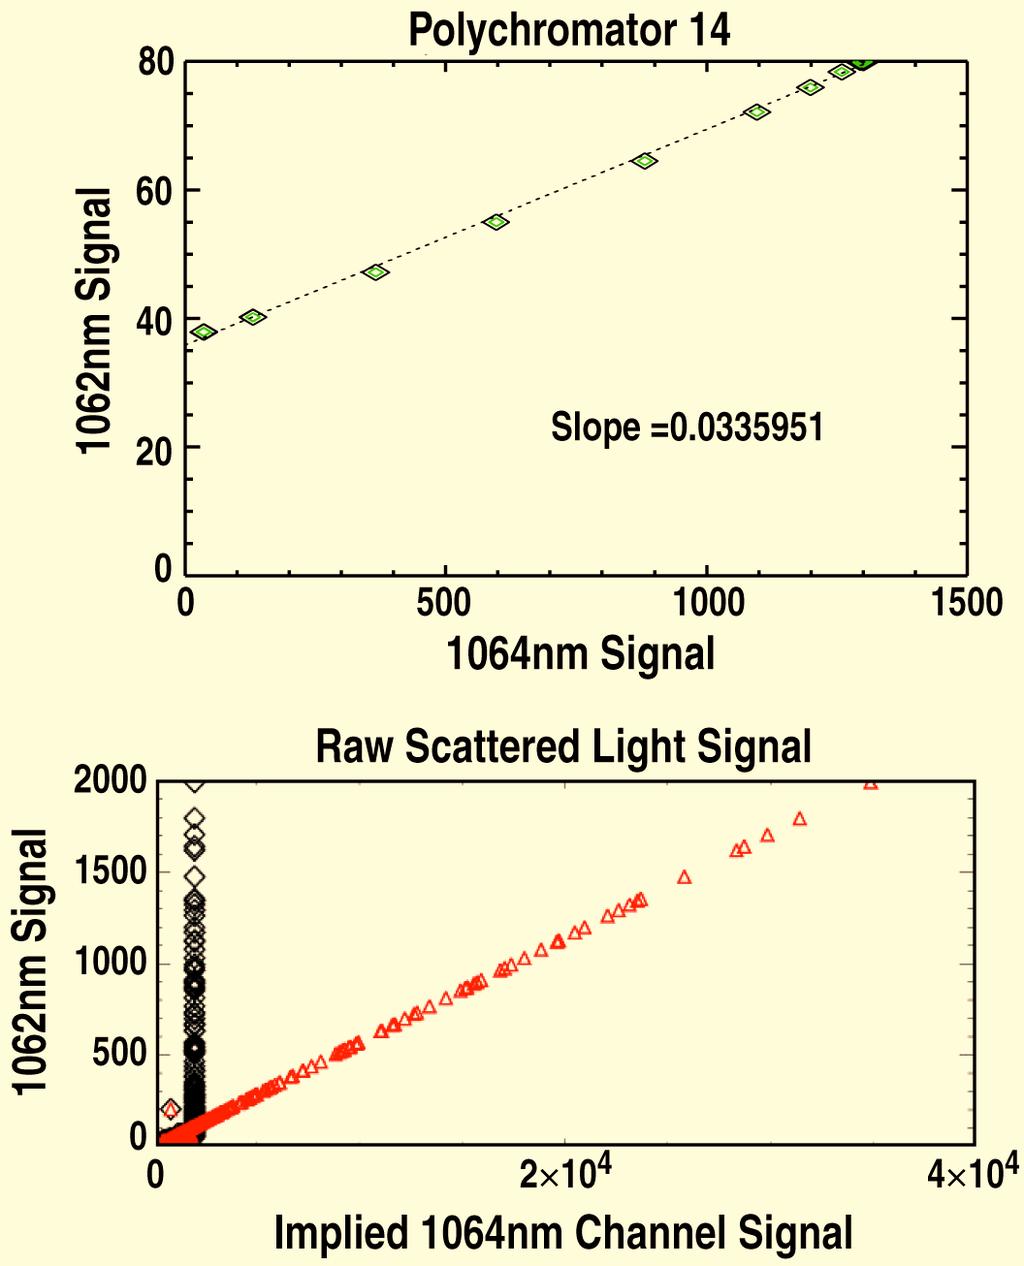 1062 nm Filters Are Sensitive to YAG Light with a lower gain than the YAG channels Divertor and Edge core polychromators contain 1062nm filters for resolving low temperatures in the plasma A small